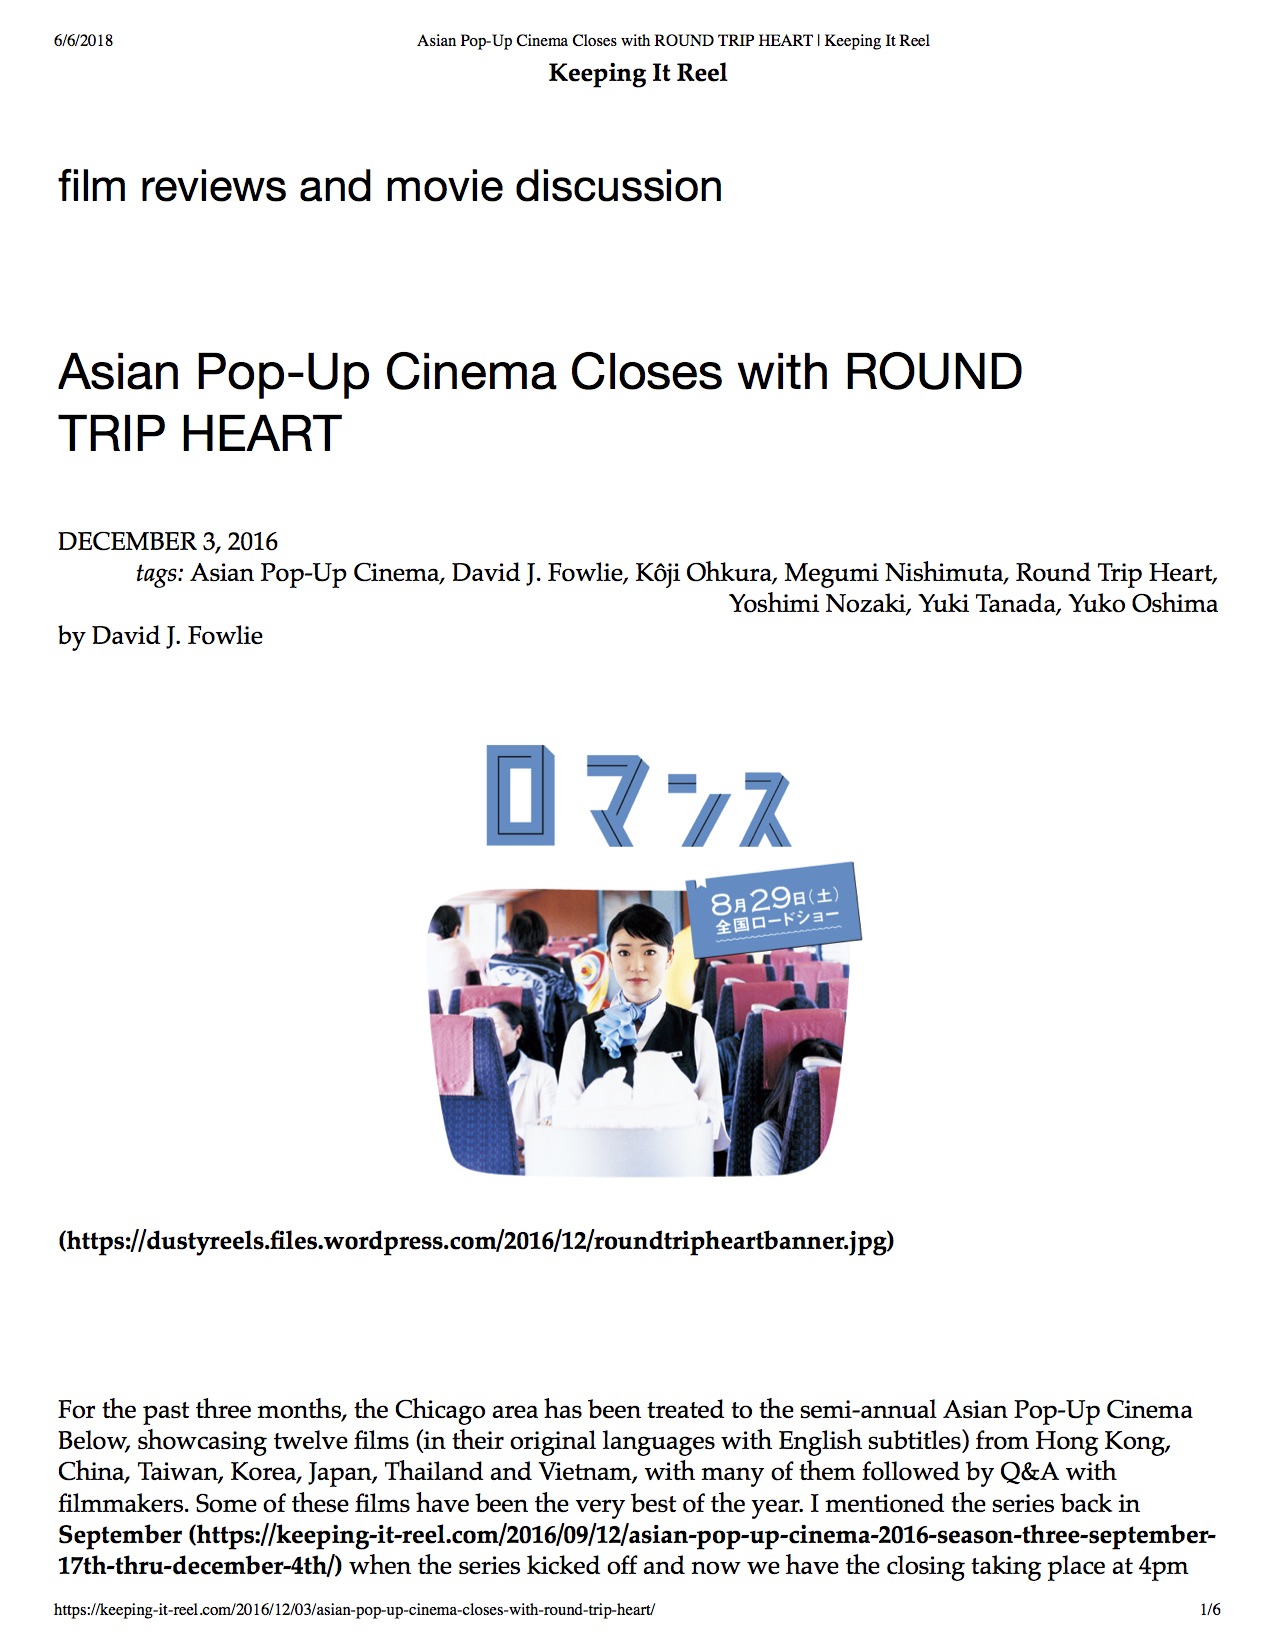 1Asian Pop-Up Cinema Closes with ROUND TRIP HEART _ Keeping It Reel.jpg